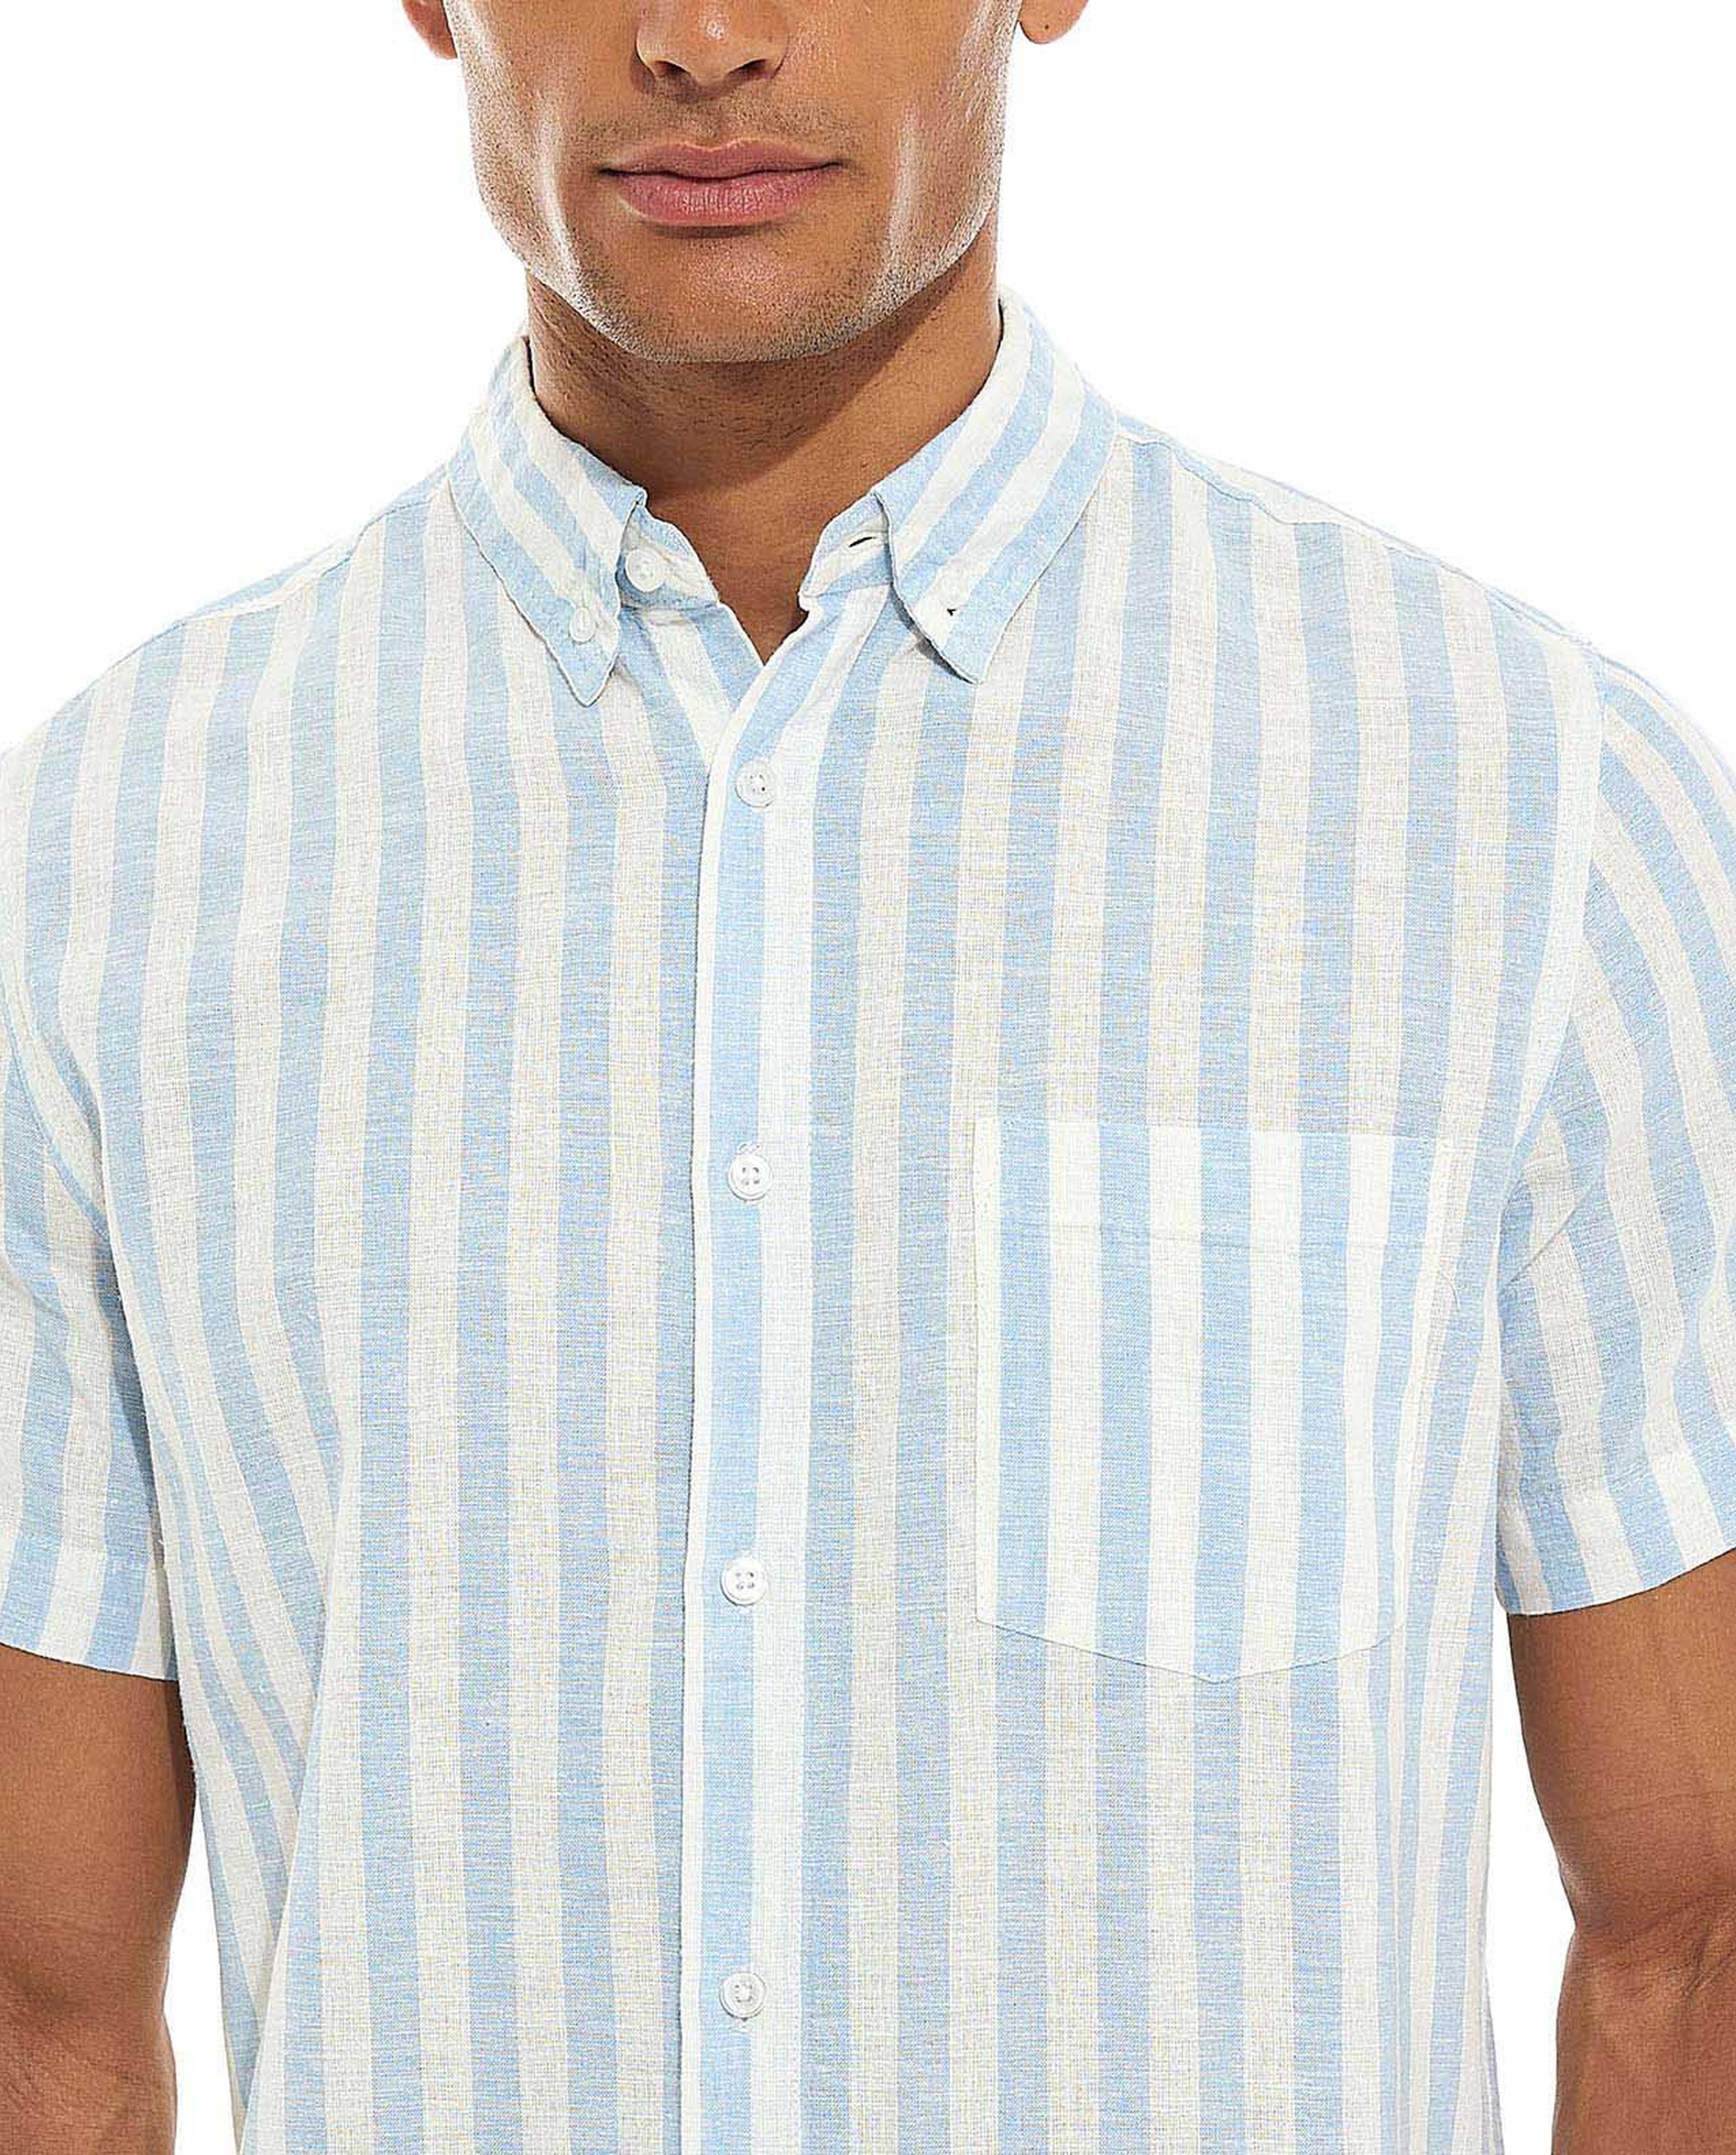 Striped Shirt with Button Down Collar and Short Sleeves